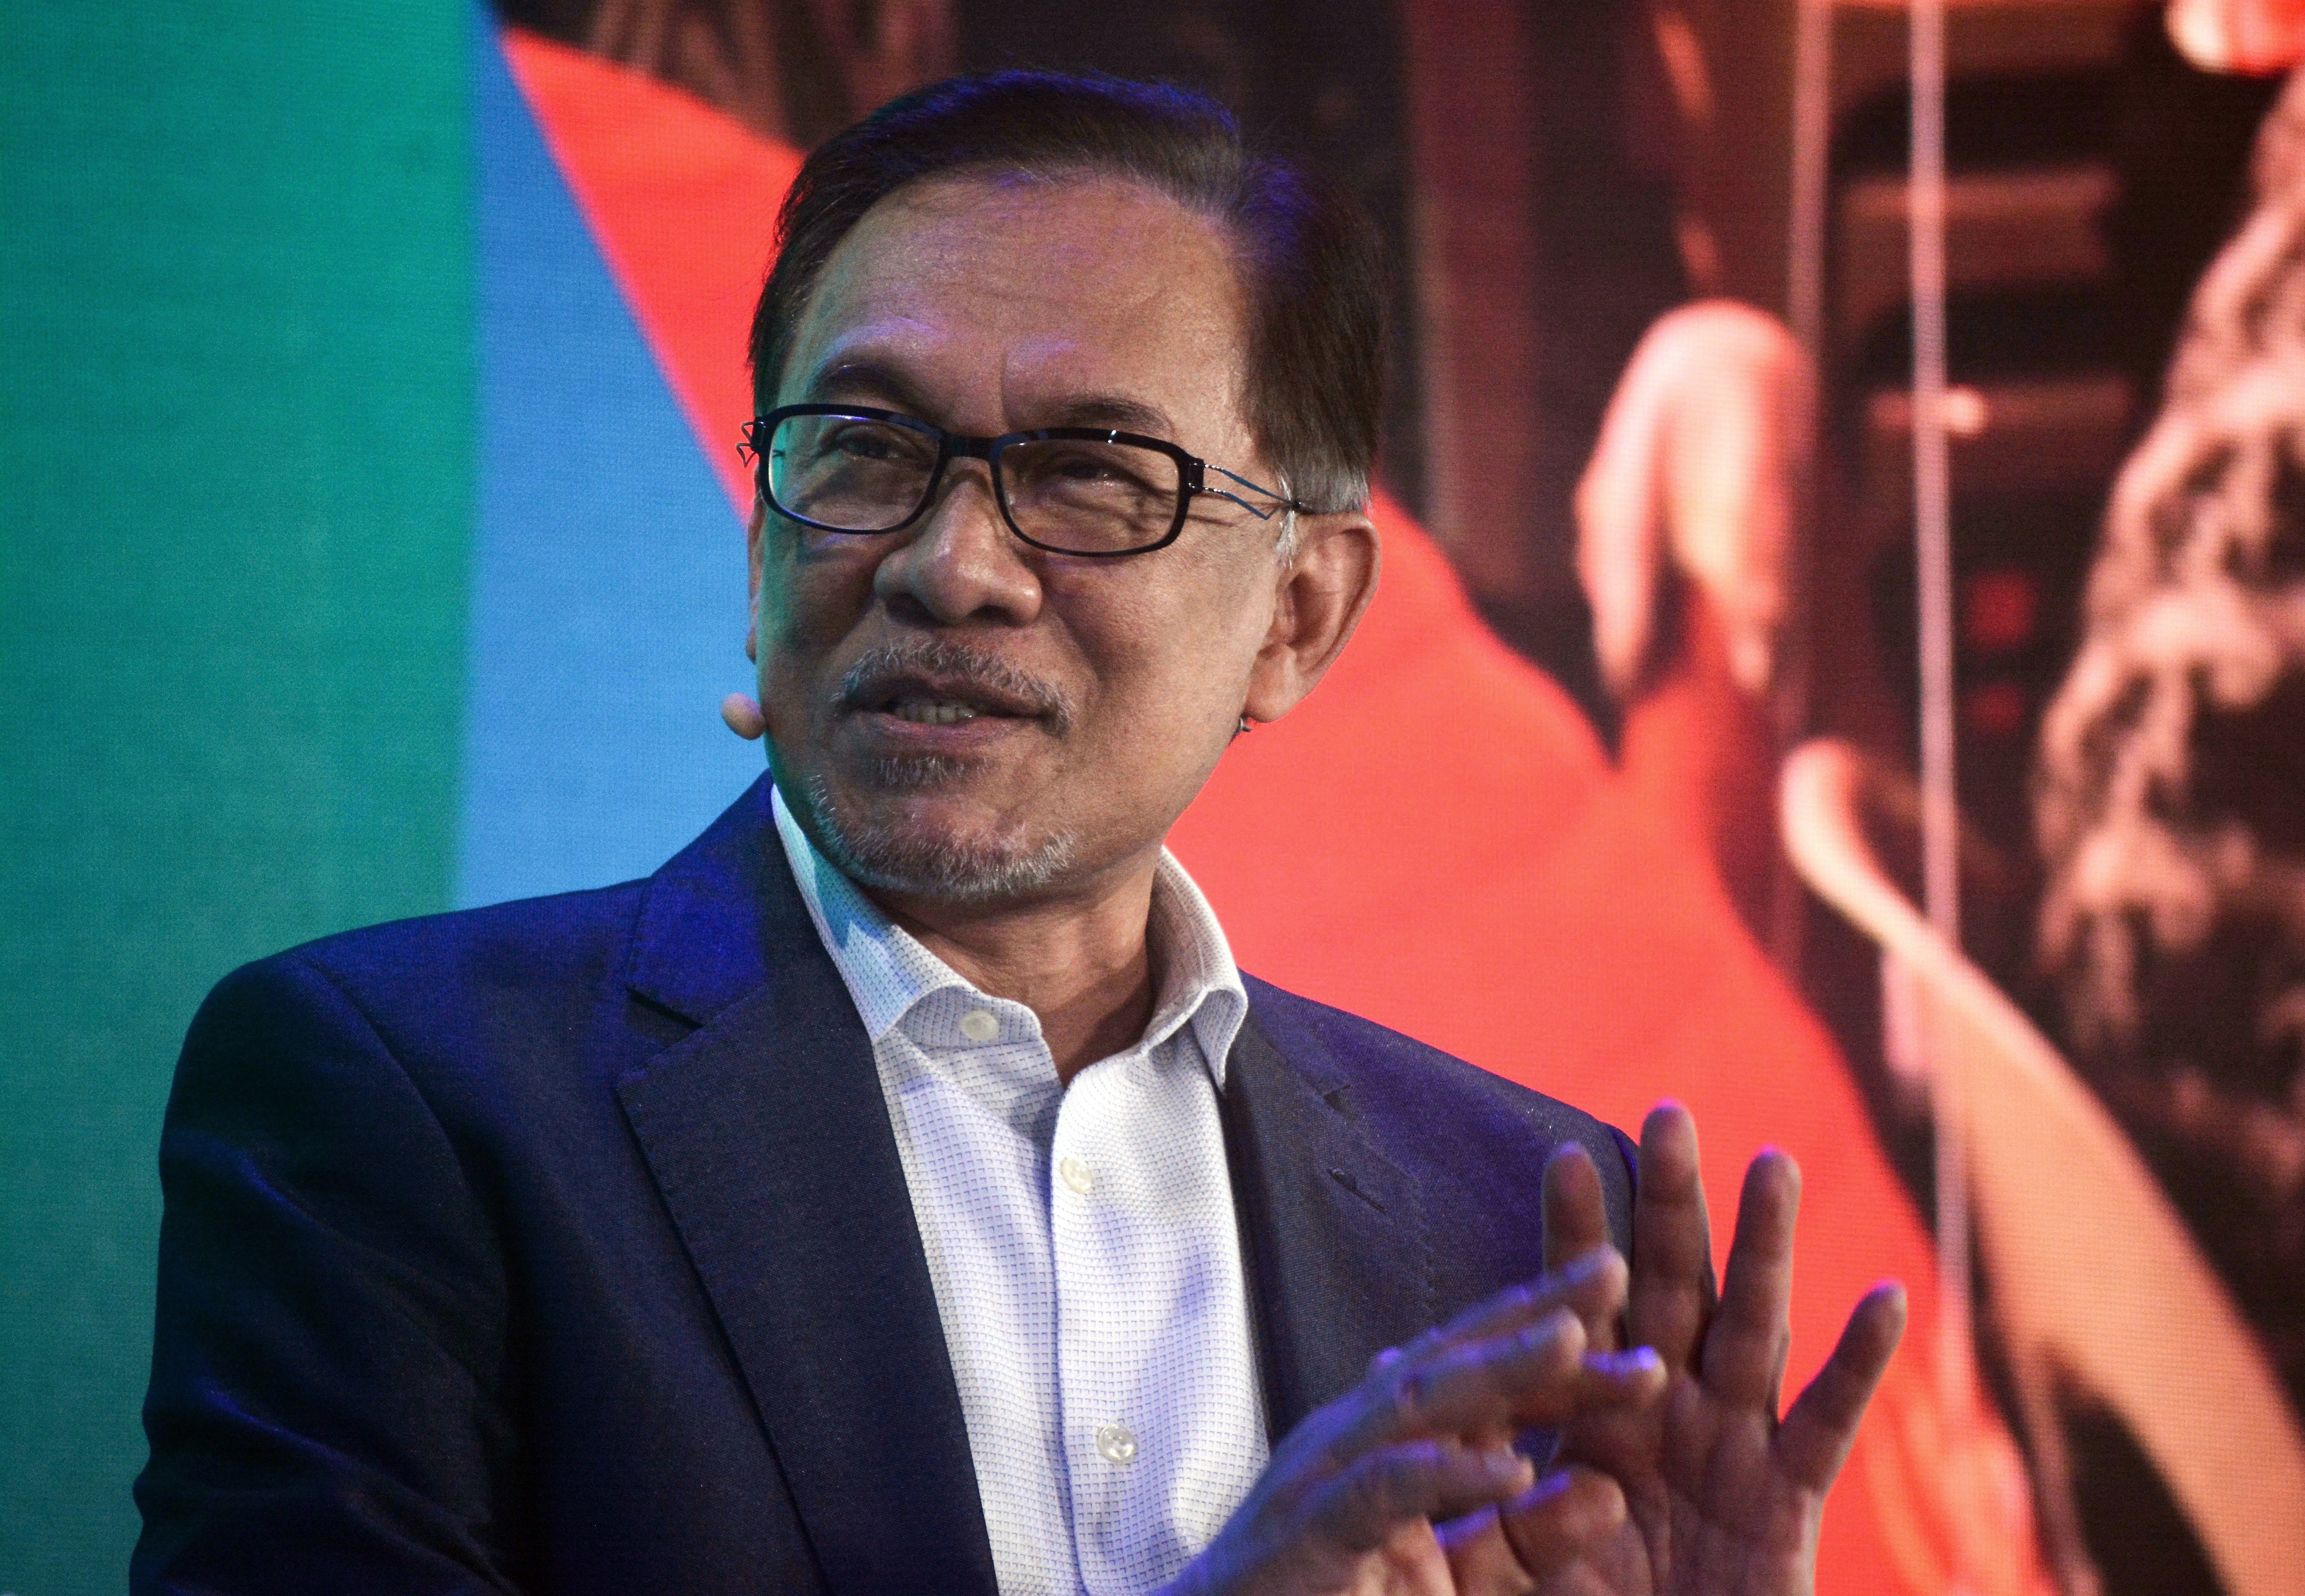 Anwar says wanted 1MDB suspect to get fair trial | Inquirer News